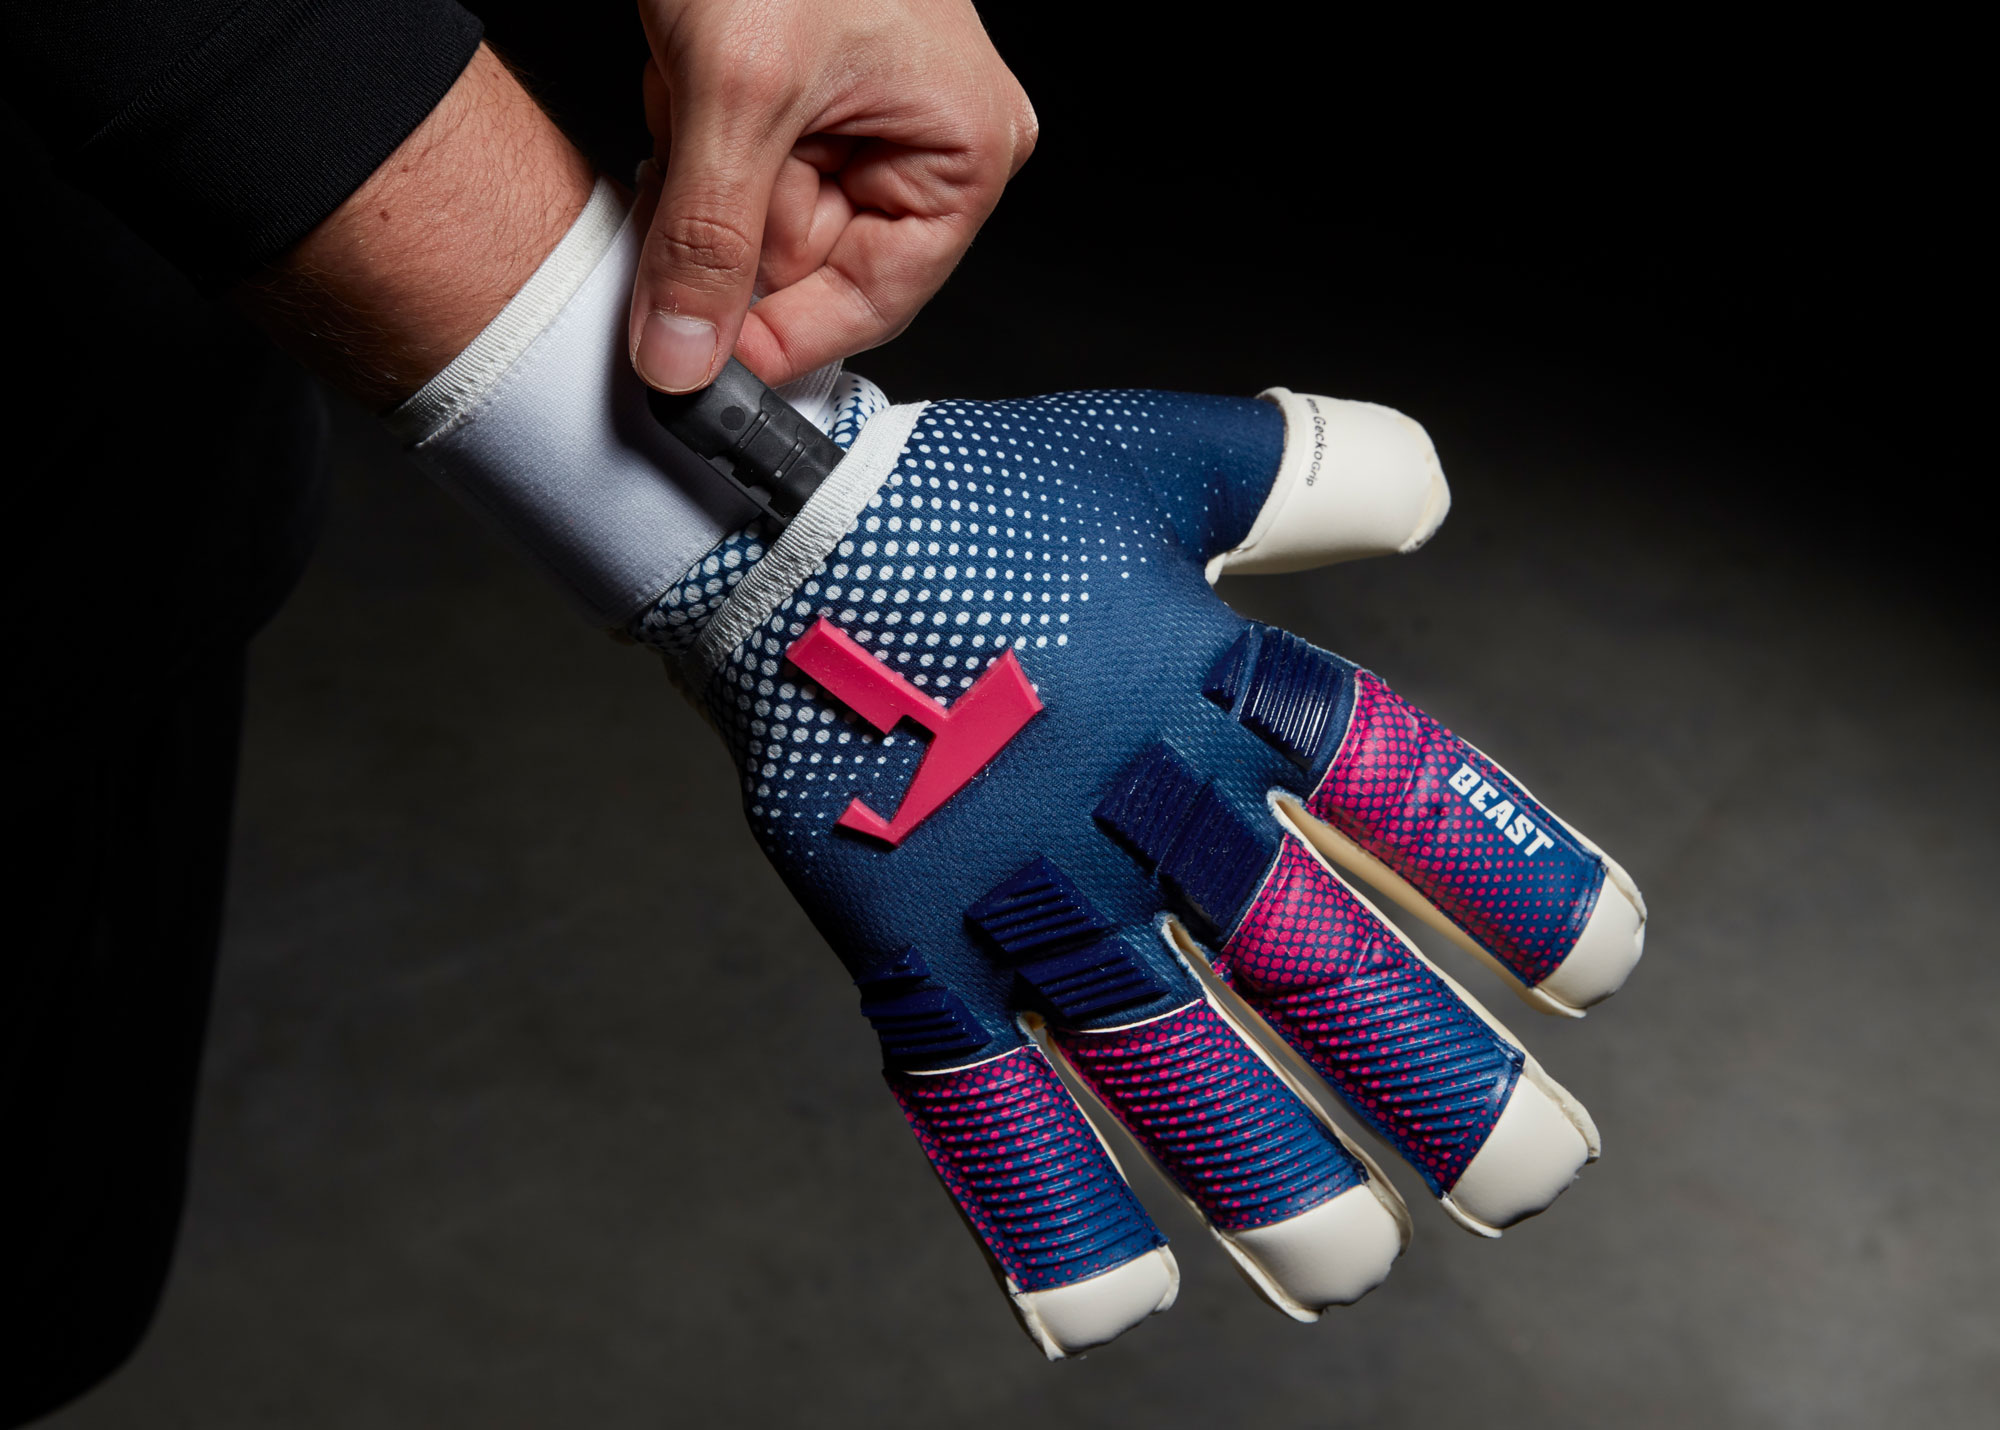 Details about   DRB Goalkeeper Glove Double Wrist Safeguard with Finger & Palm Protection Size 4 